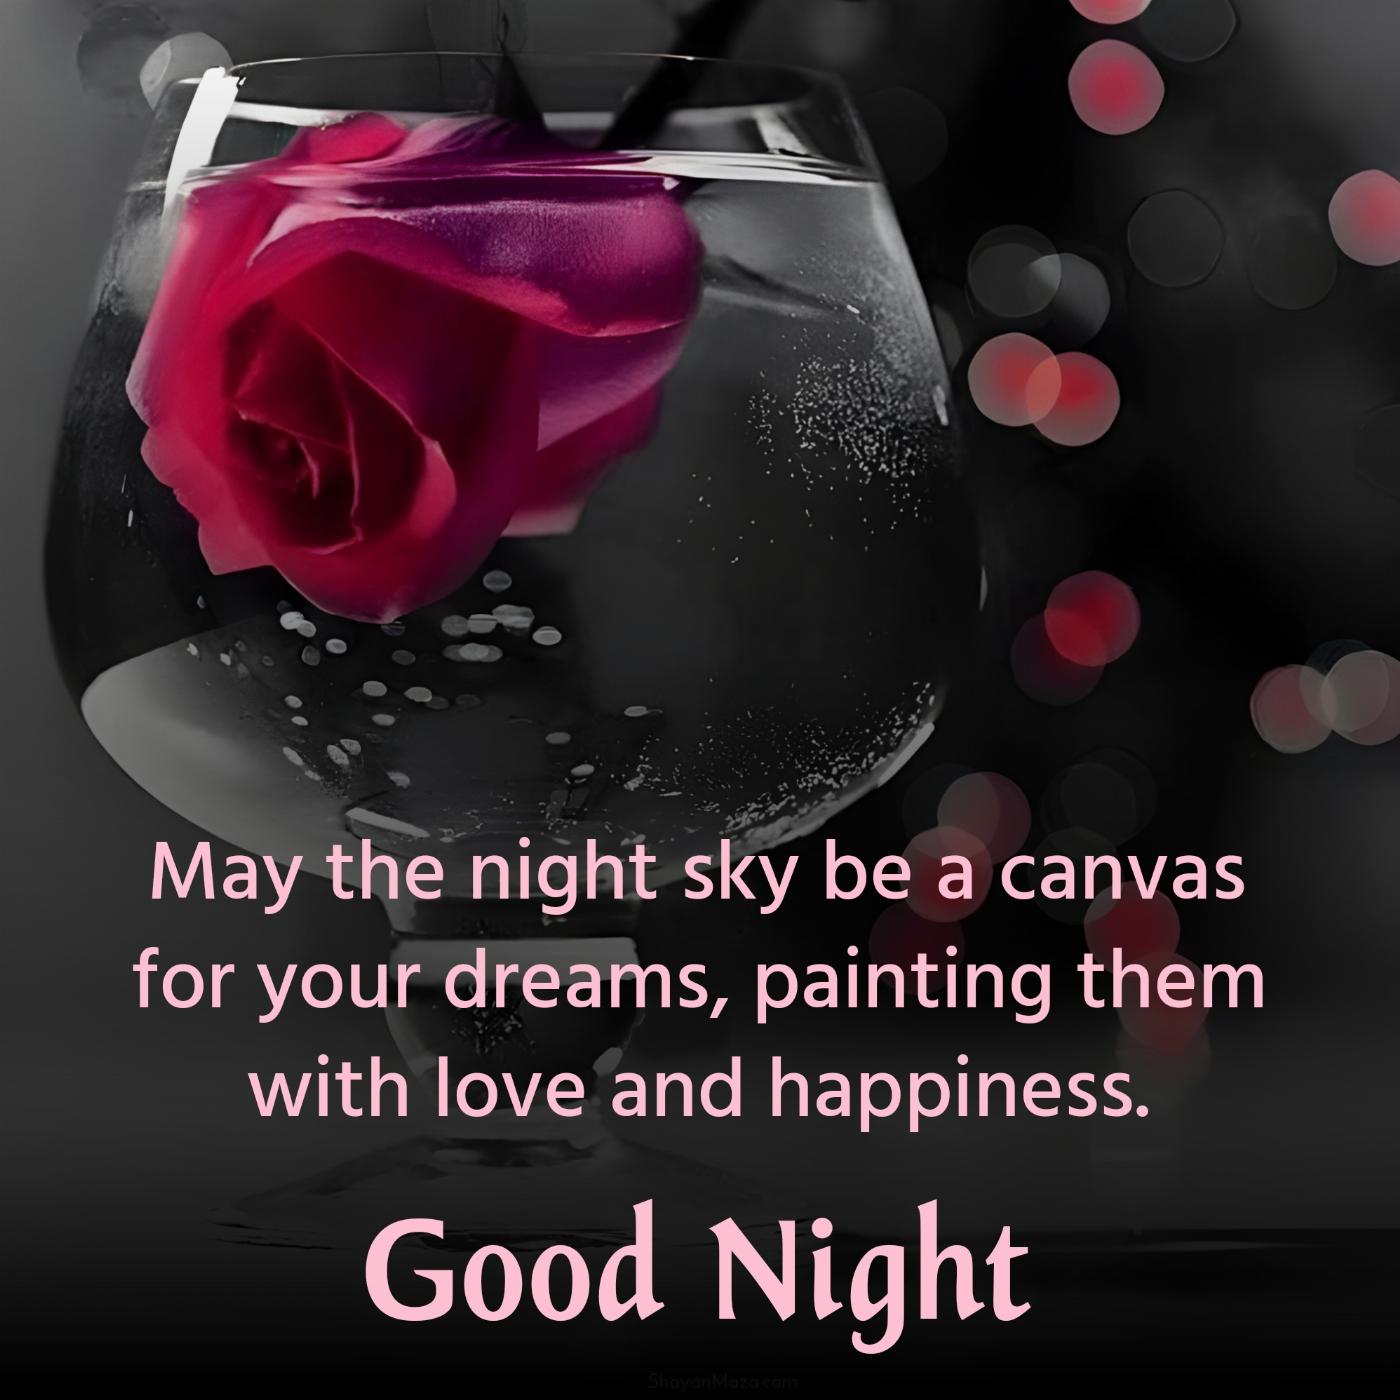 May the night sky be a canvas for your dreams